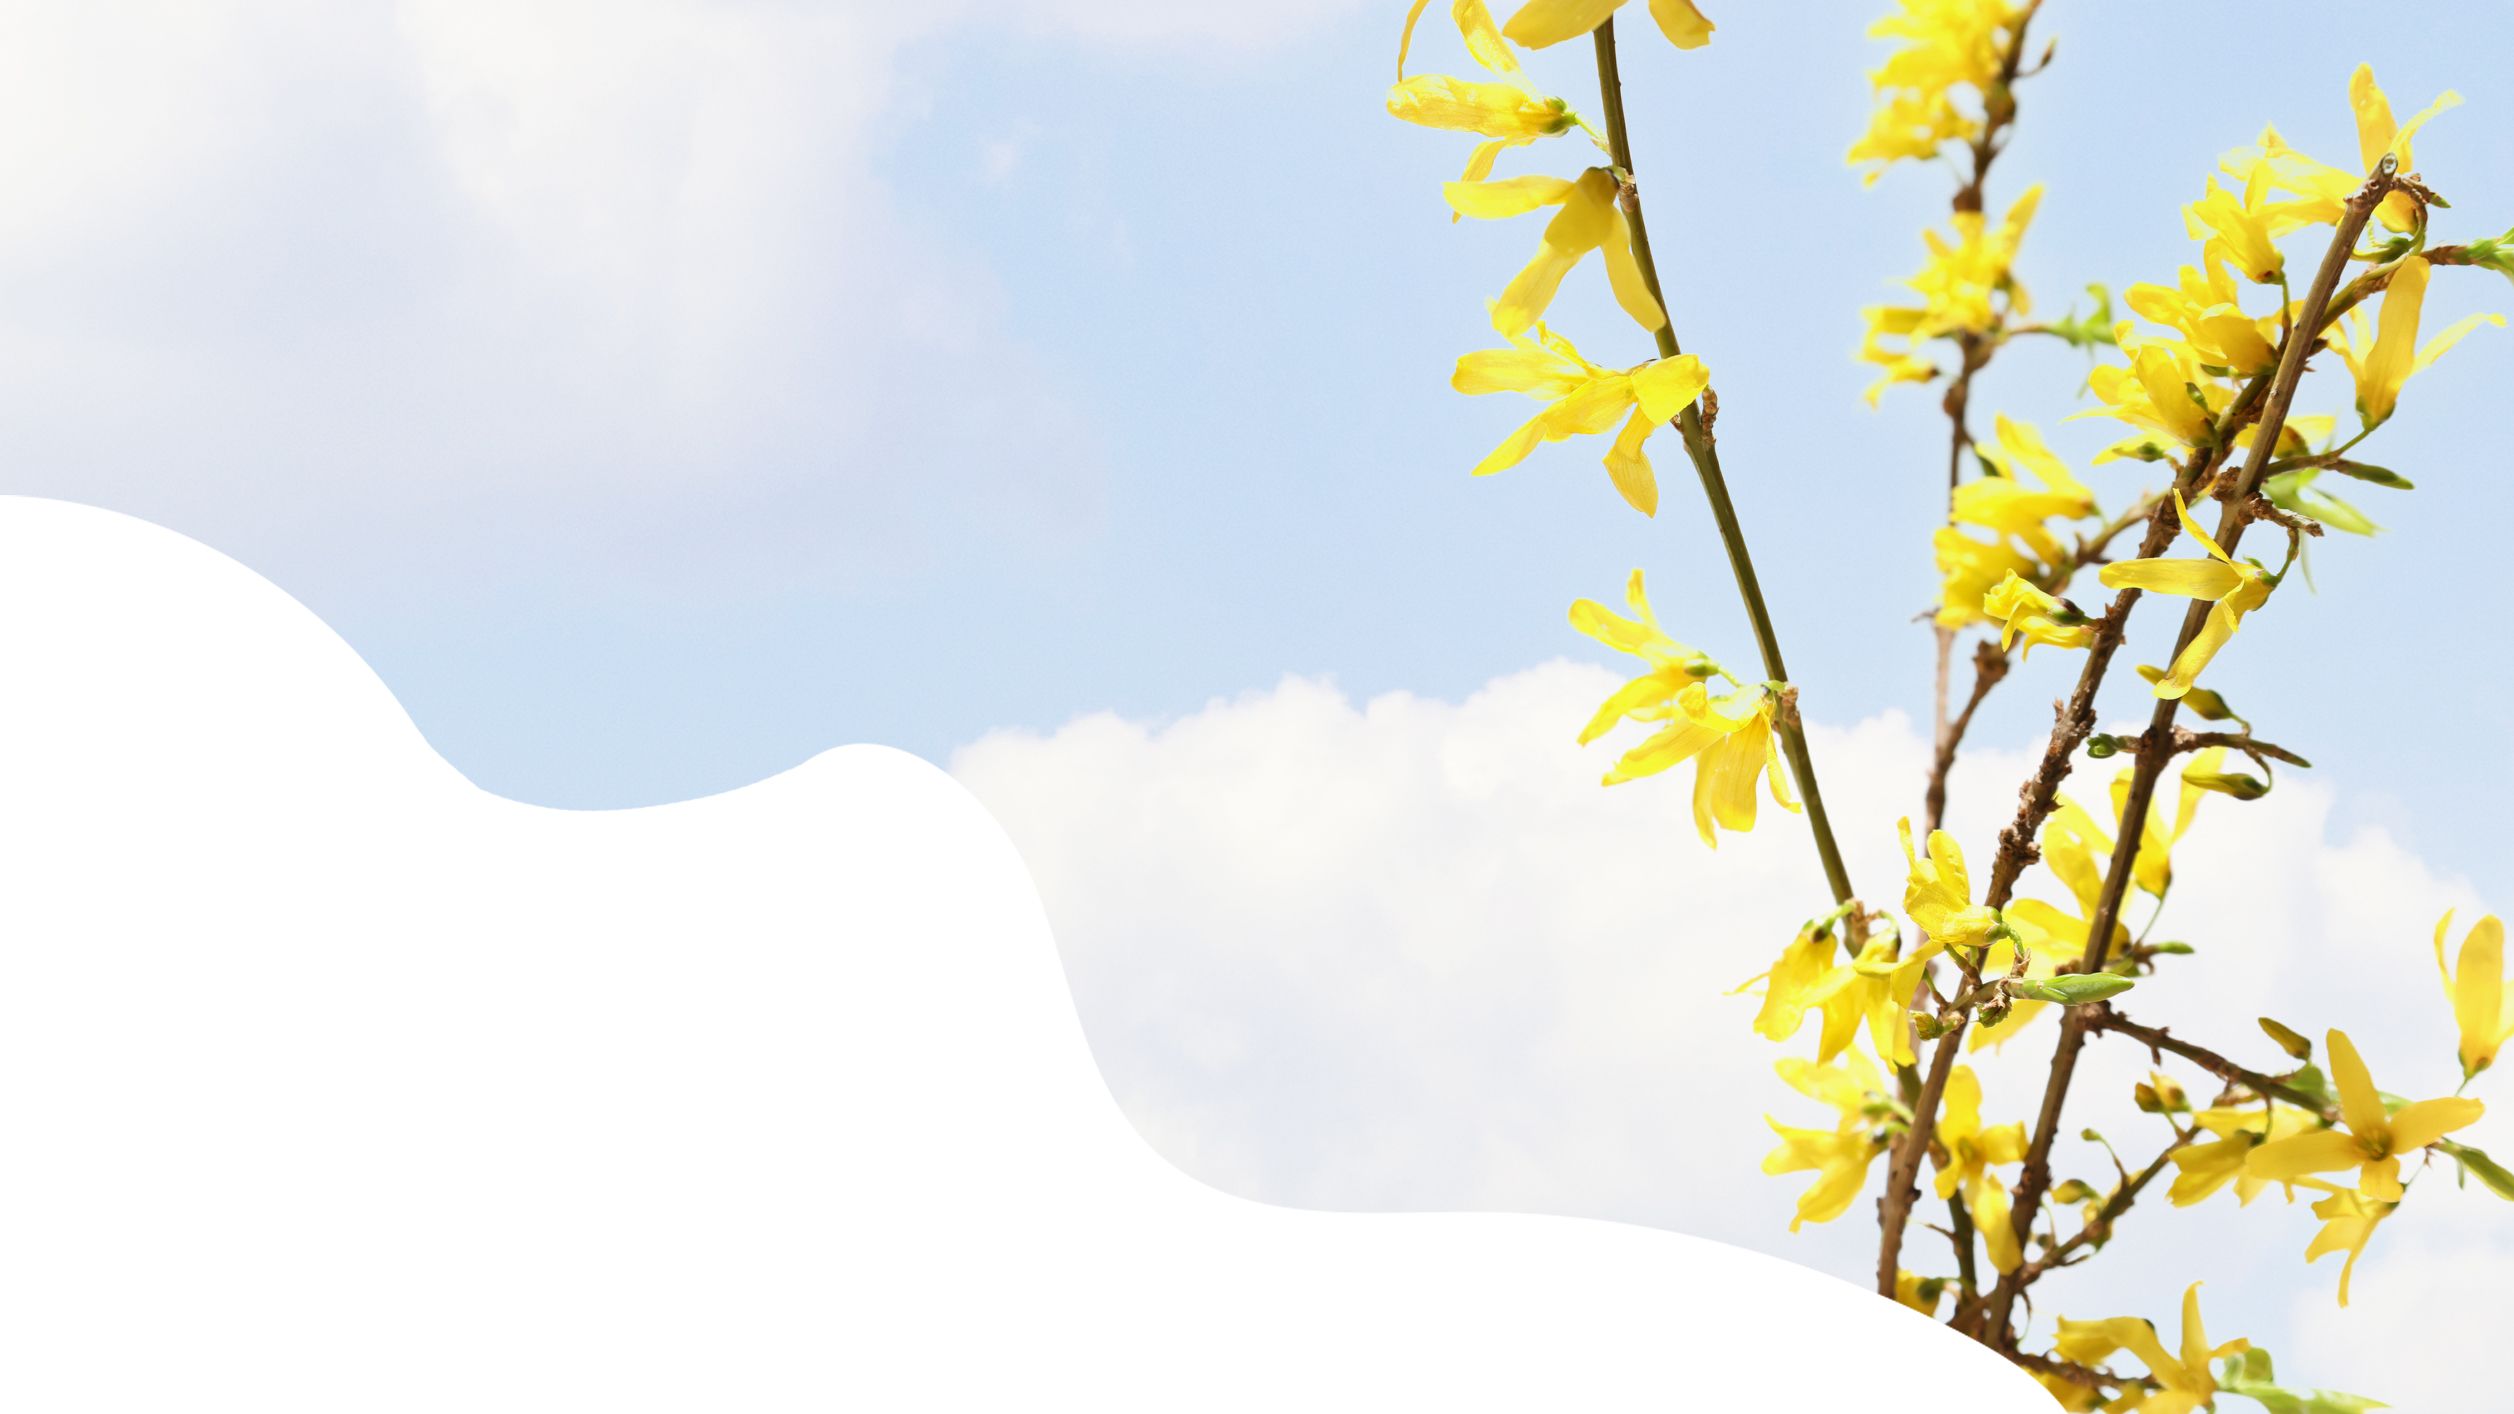 Yellow Forsythia flowers on a cloudy background